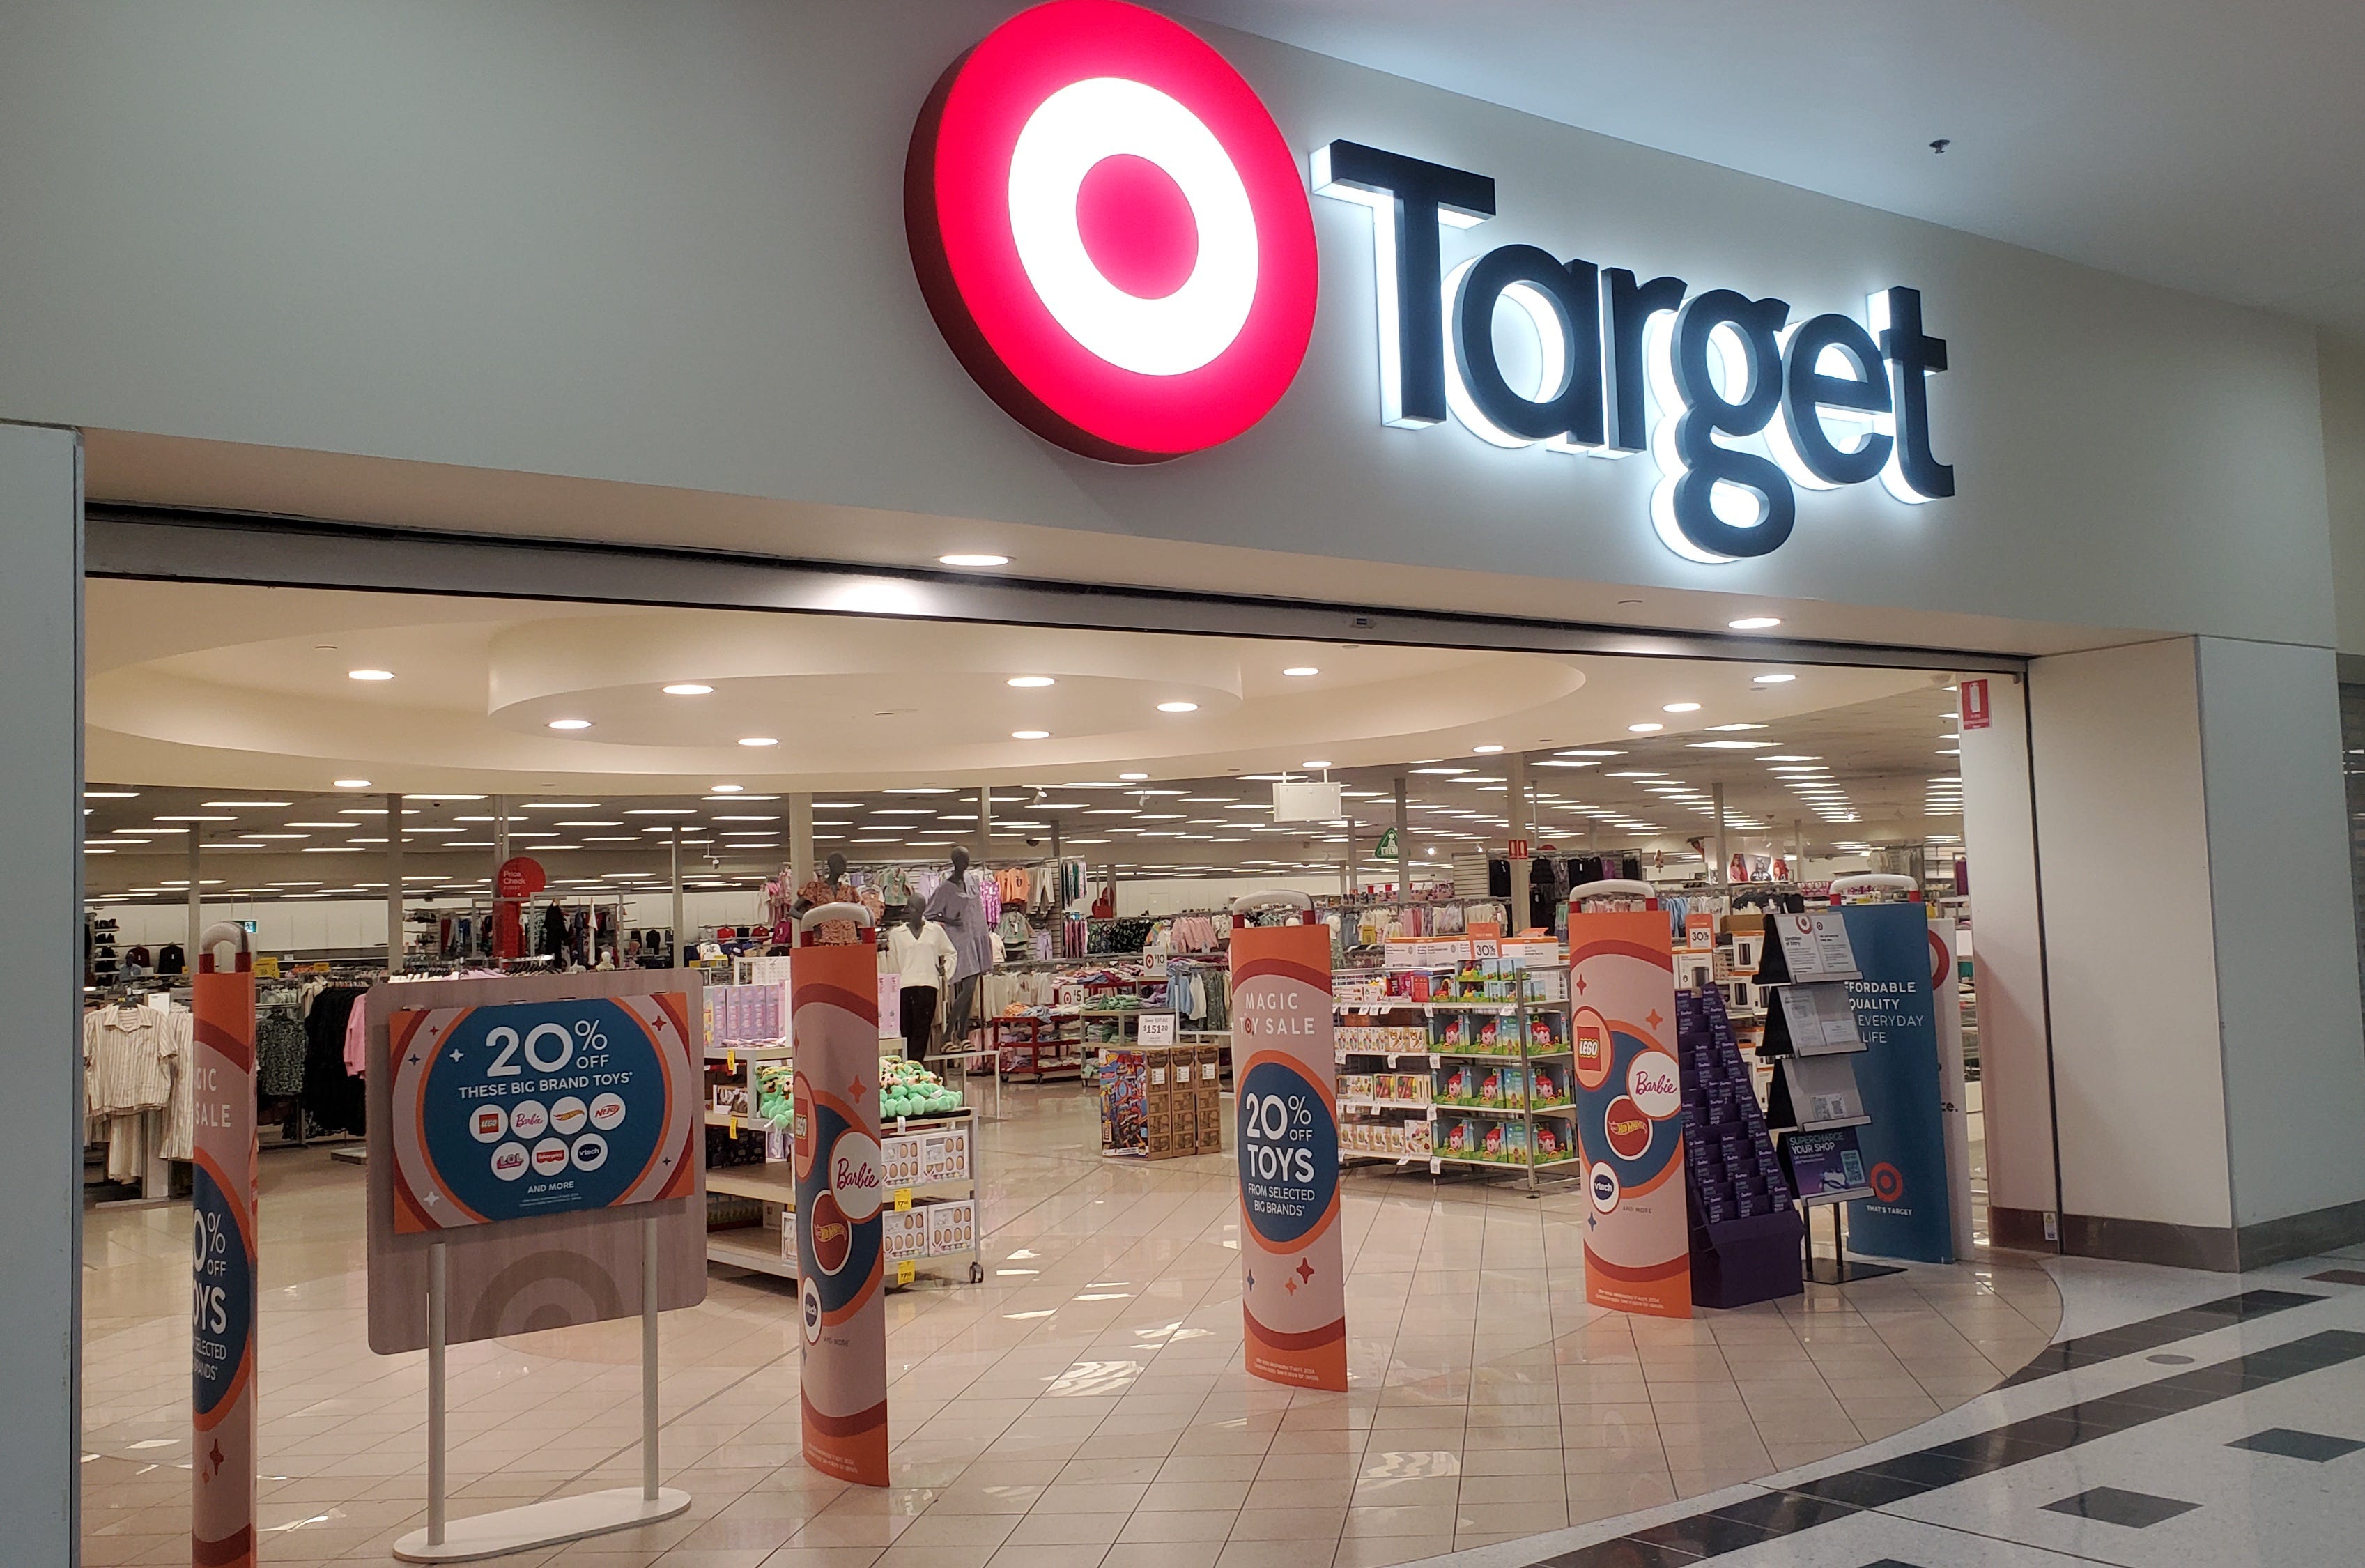 <p><a href="https://www.businessinsider.com/target-cat-and-jack-kids-apparel-millions-of-items-annually-2024-3">Americans are obsessed with Target</a>, and it's only upon visiting Australian Target that I can understand why the phenomenon stirs such confusion here. </p><p>Surprisingly, these <a href="https://www.businessinsider.com/australian-target-us-target-which-is-better-2019-9">two separate corporations have nothing to do with each other</a> despite their shared name and remarkable likeness.</p><p>Perhaps I'm biased but, in my opinion, Australian Target is underwhelming compared to the department stores we have back home. Unlike the beloved US chain, these Targets don't have a grocery section or mini food court with a Starbucks or Pizza Hut.</p><p>Plus, the Aussie versions of Target tend to be tinier with a smaller variety of products. I much prefer Australia's Kmart stores, which are <a href="https://www.businessinsider.com/australian-kmart-department-store-chain-wesfarmers-2019-10">also not related to the American version</a> with the same name. </p>